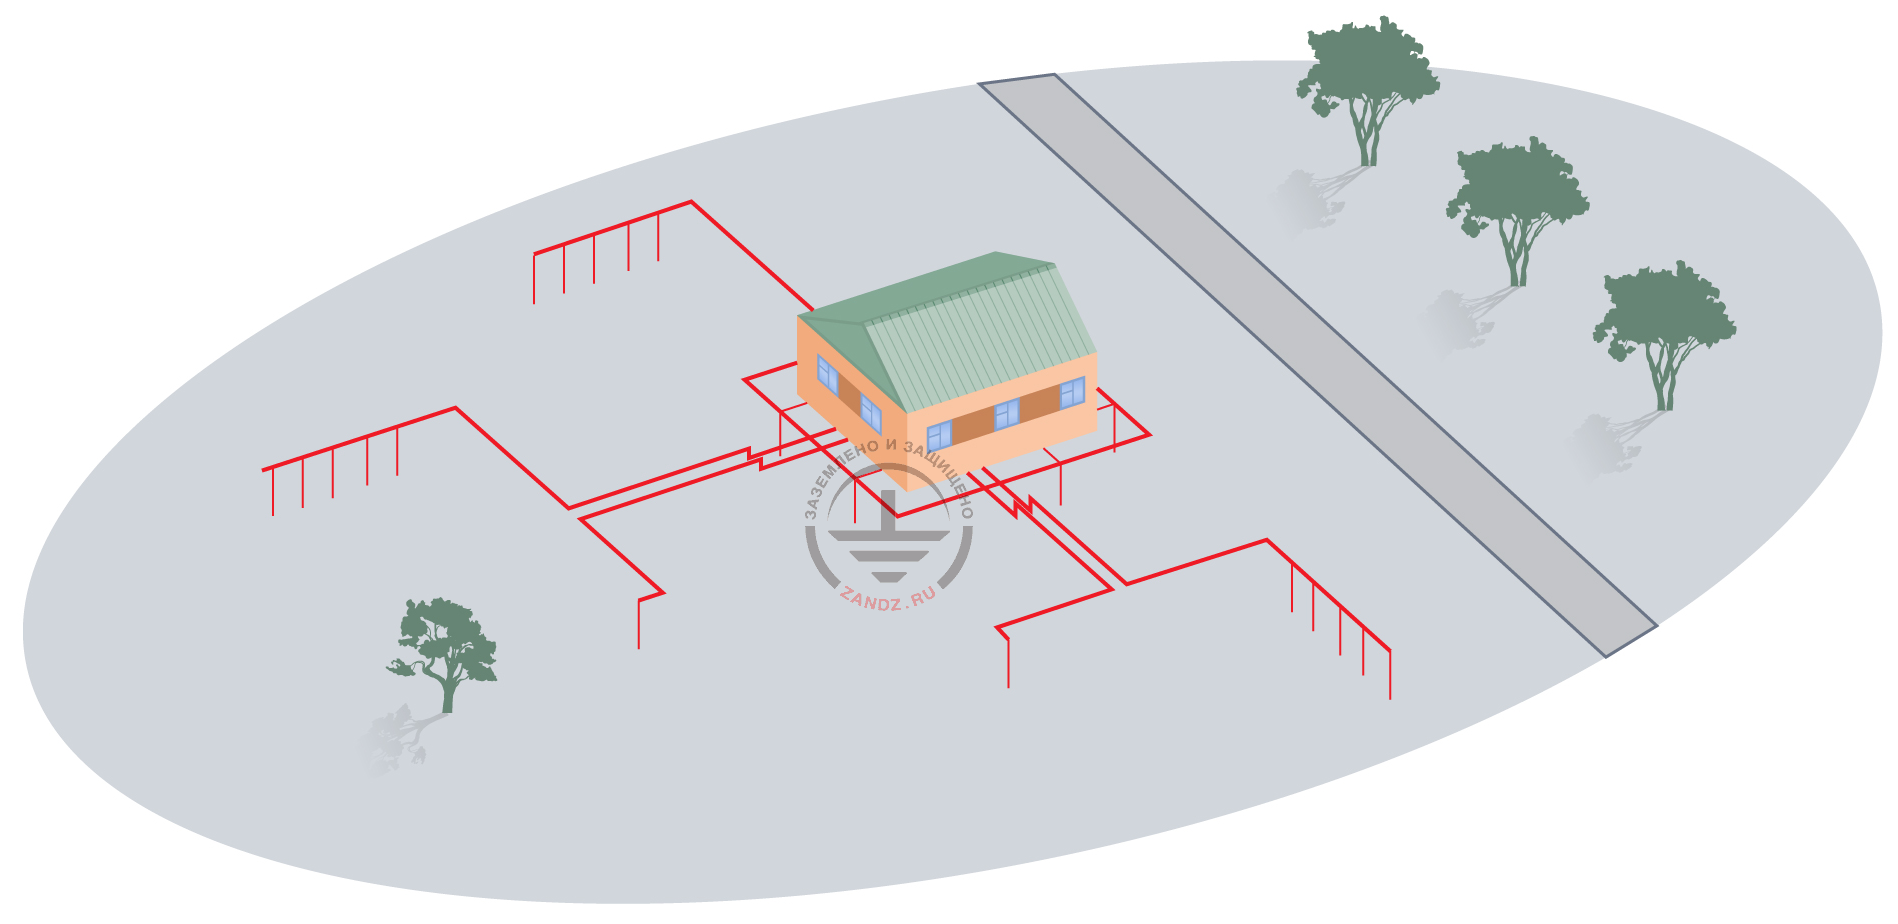 Lightning protection and grounding design for a wire broadcasting center